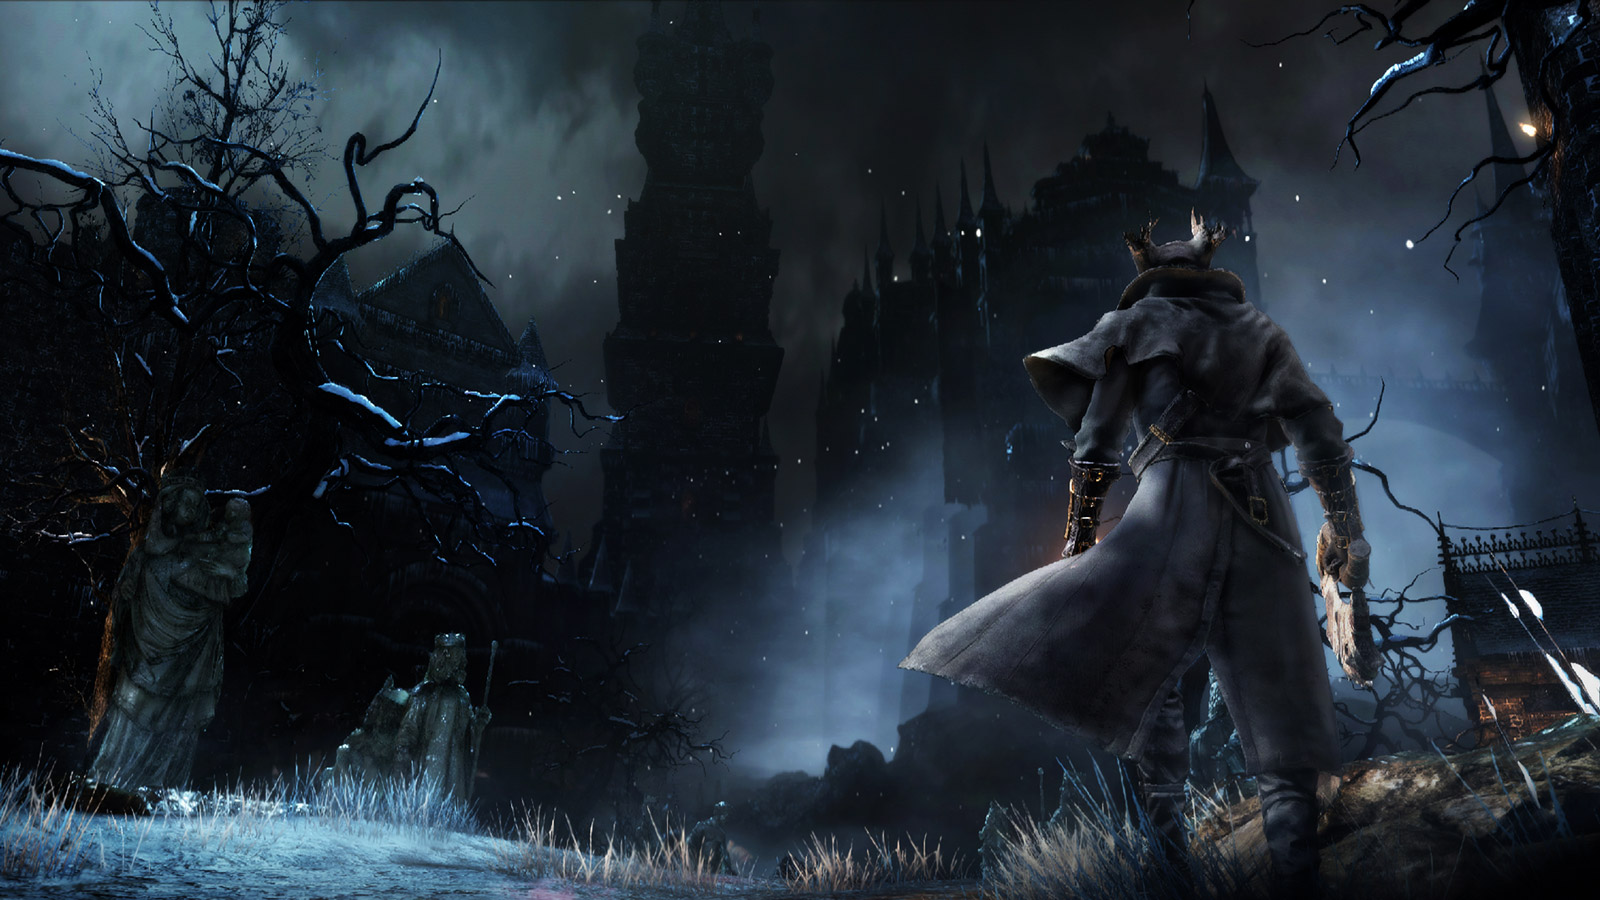 Free Download Bloodborne Wallpaper In 1600x900 1600x900 For Your Desktop Mobile Tablet Explore 41 1600x900 Free Wallpaper Free 1600x900 Wide Desktop Wallpapers Christmas Wallpaper 1600x900 Widescreen